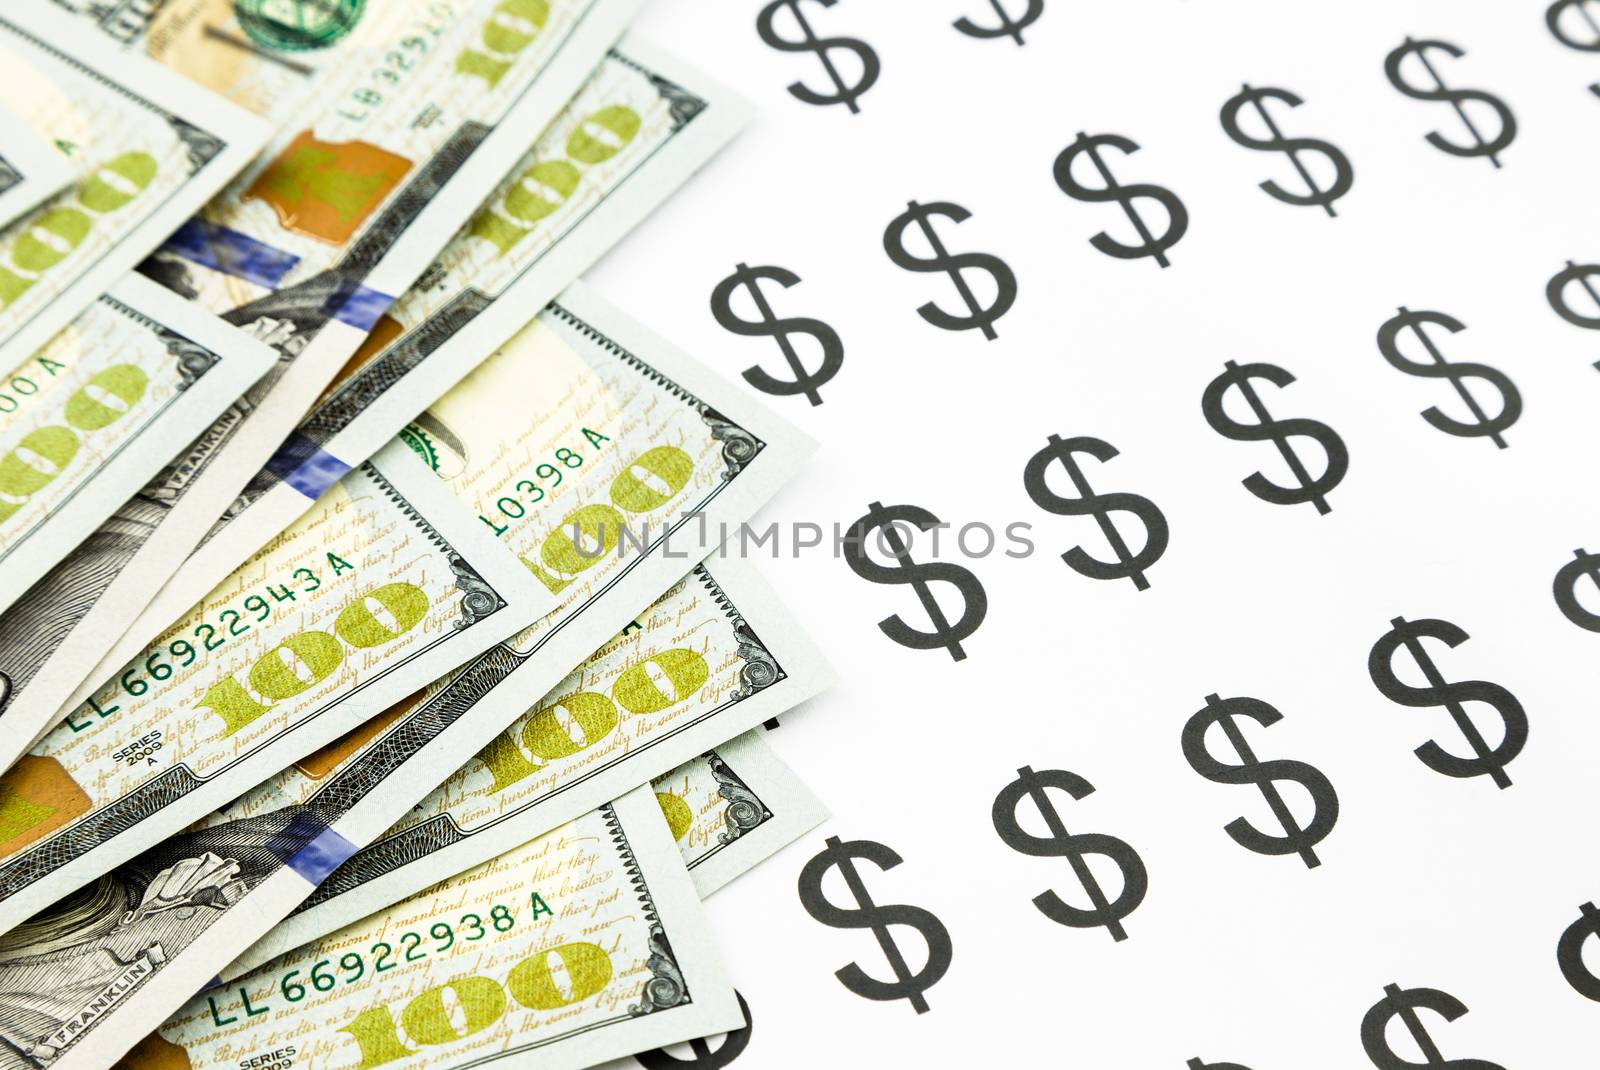 new edition 100 dollar banknotes and dollar sign, currency and money for business concept